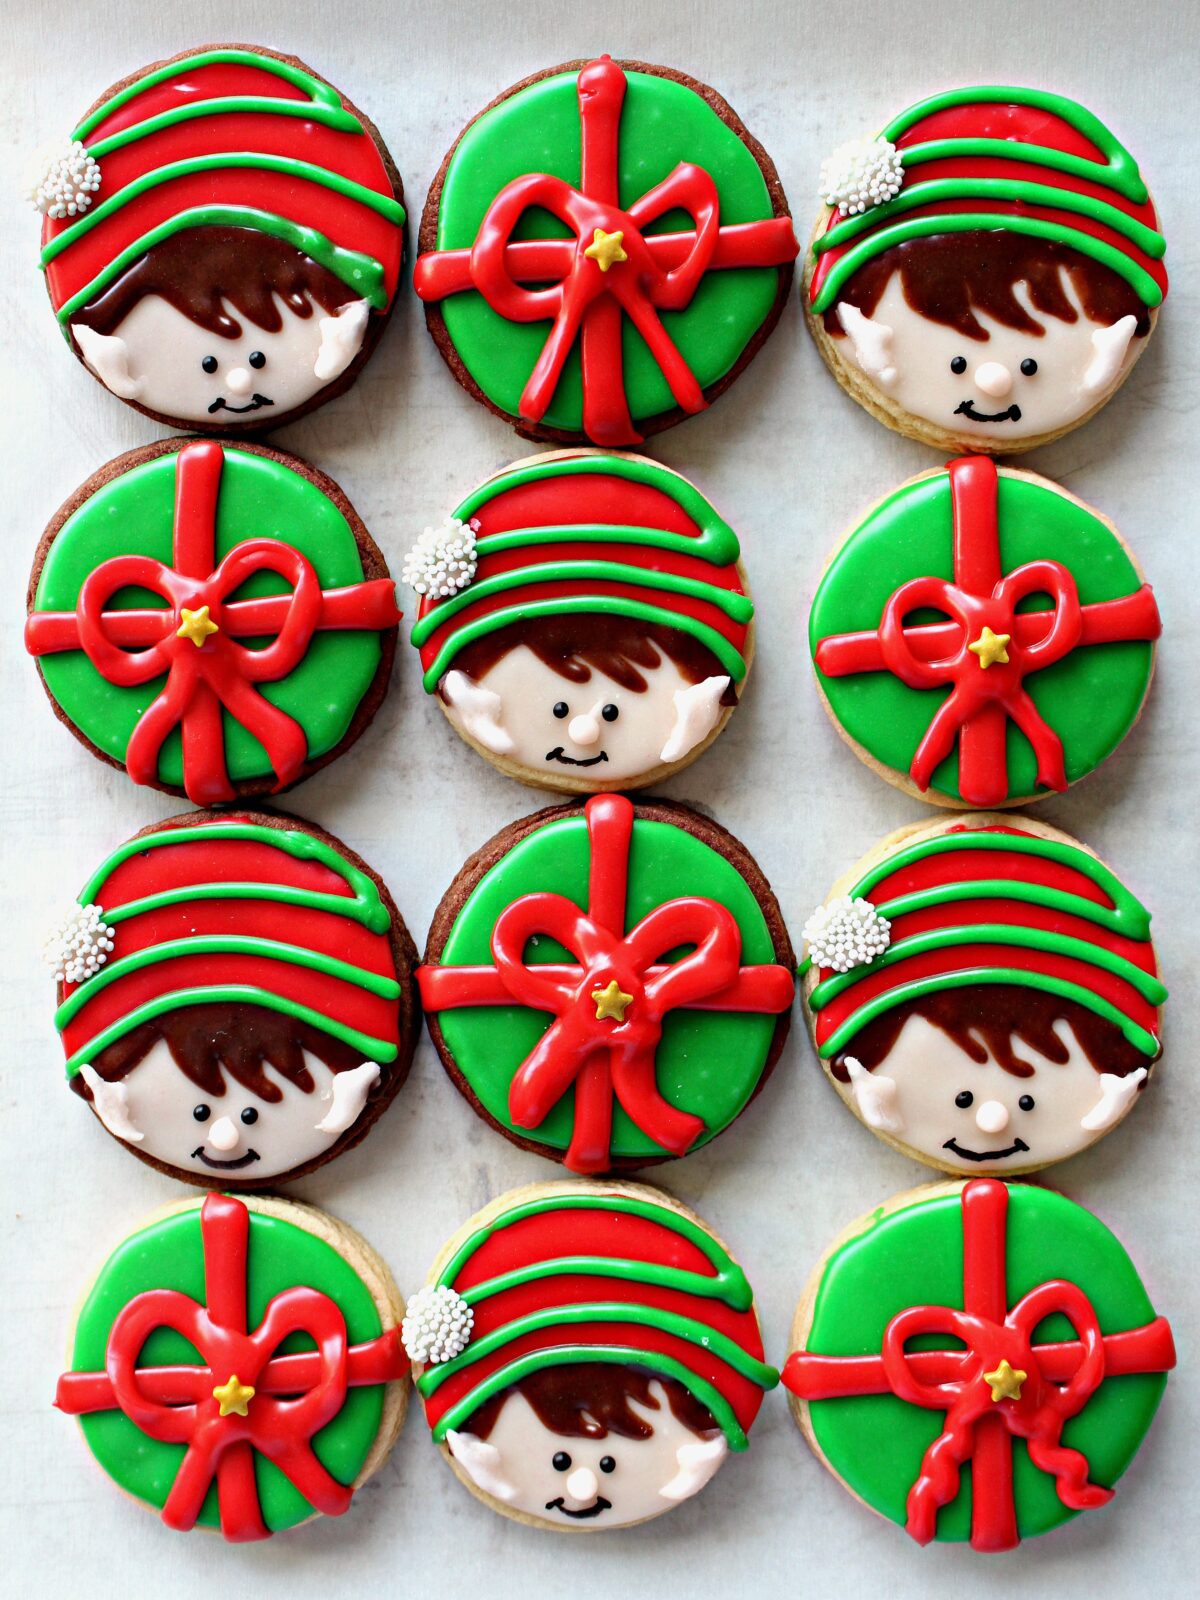 Sugar Cookies with decorated as elf on the shelf faces and wrapped gifts.